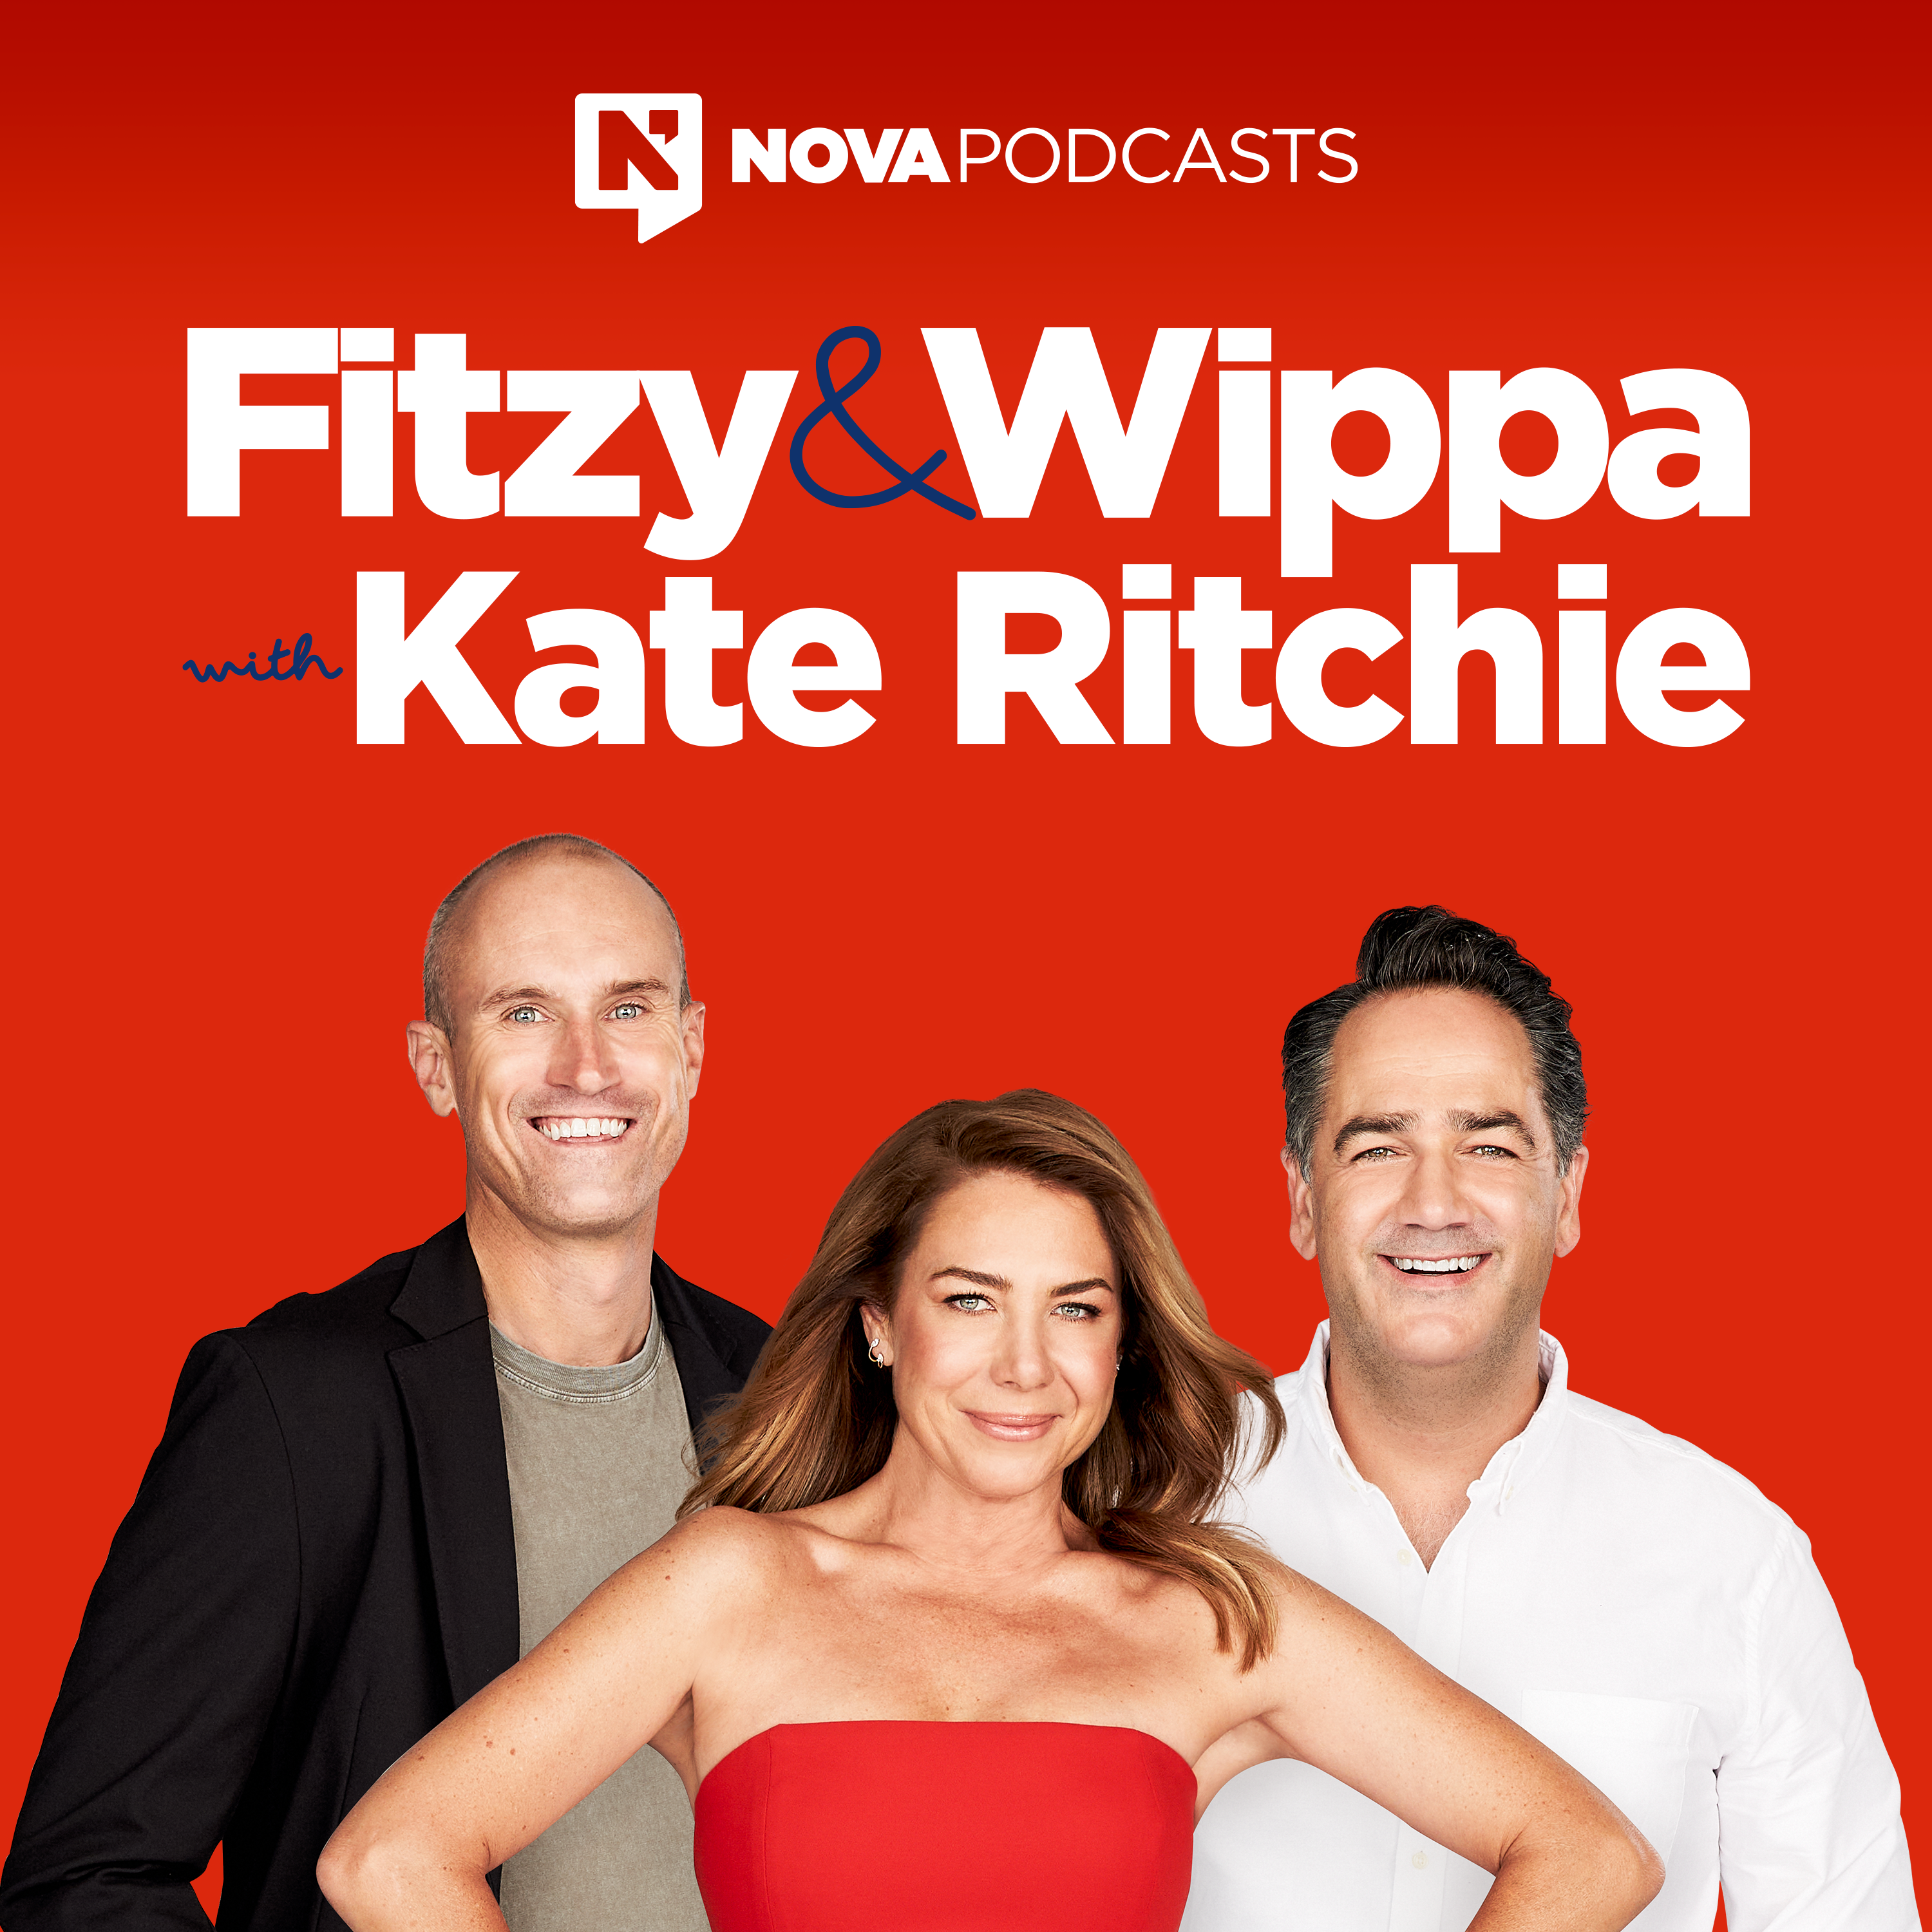 A Fitzy Rant, Holiday Disaster And Awkward Call… We’re Back!